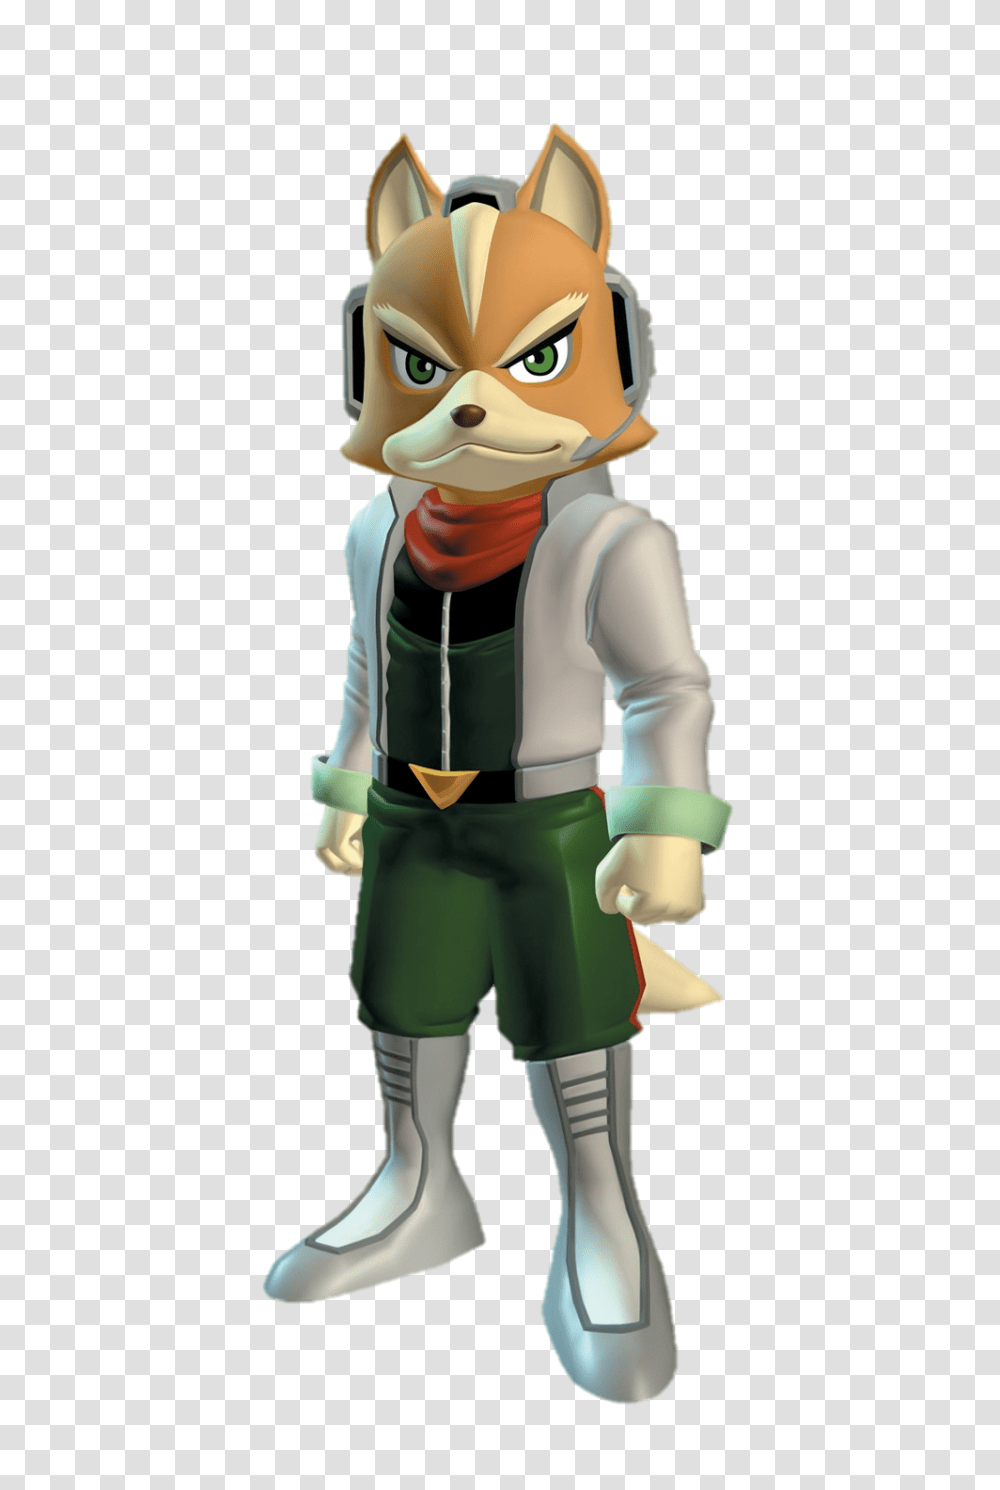 2 Star Fox Pic, Game, Elf, Figurine, Toy Transparent Png